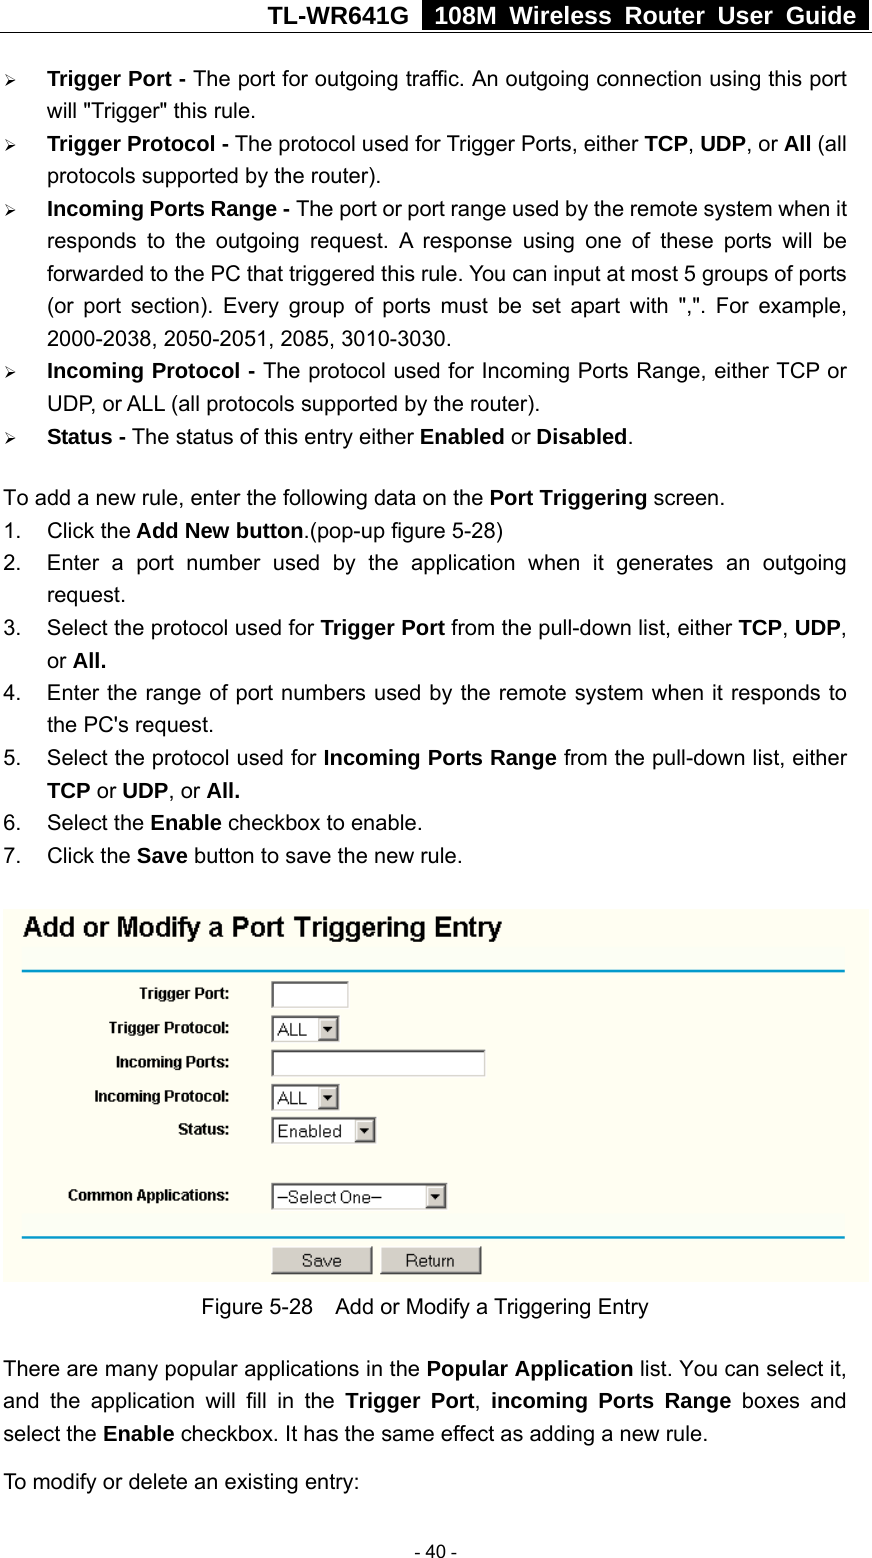 TL-WR641G   108M Wireless Router User Guide  ¾ Trigger Port - The port for outgoing traffic. An outgoing connection using this port will &quot;Trigger&quot; this rule. ¾ Trigger Protocol - The protocol used for Trigger Ports, either TCP, UDP, or All (all protocols supported by the router). ¾ Incoming Ports Range - The port or port range used by the remote system when it responds to the outgoing request. A response using one of these ports will be forwarded to the PC that triggered this rule. You can input at most 5 groups of ports (or port section). Every group of ports must be set apart with &quot;,&quot;. For example, 2000-2038, 2050-2051, 2085, 3010-3030. ¾ Incoming Protocol - The protocol used for Incoming Ports Range, either TCP or UDP, or ALL (all protocols supported by the router). ¾ Status - The status of this entry either Enabled or Disabled. To add a new rule, enter the following data on the Port Triggering screen.   1. Click the Add New button.(pop-up figure 5-28) 2.  Enter a port number used by the application when it generates an outgoing request.   3.  Select the protocol used for Trigger Port from the pull-down list, either TCP, UDP, or All. 4.  Enter the range of port numbers used by the remote system when it responds to the PC&apos;s request. 5.  Select the protocol used for Incoming Ports Range from the pull-down list, either TCP or UDP, or All. 6. Select the Enable checkbox to enable.   7. Click the Save button to save the new rule.  Figure 5-28    Add or Modify a Triggering Entry There are many popular applications in the Popular Application list. You can select it, and the application will fill in the Trigger Port,  incoming Ports Range boxes and select the Enable checkbox. It has the same effect as adding a new rule. To modify or delete an existing entry:  - 40 - 